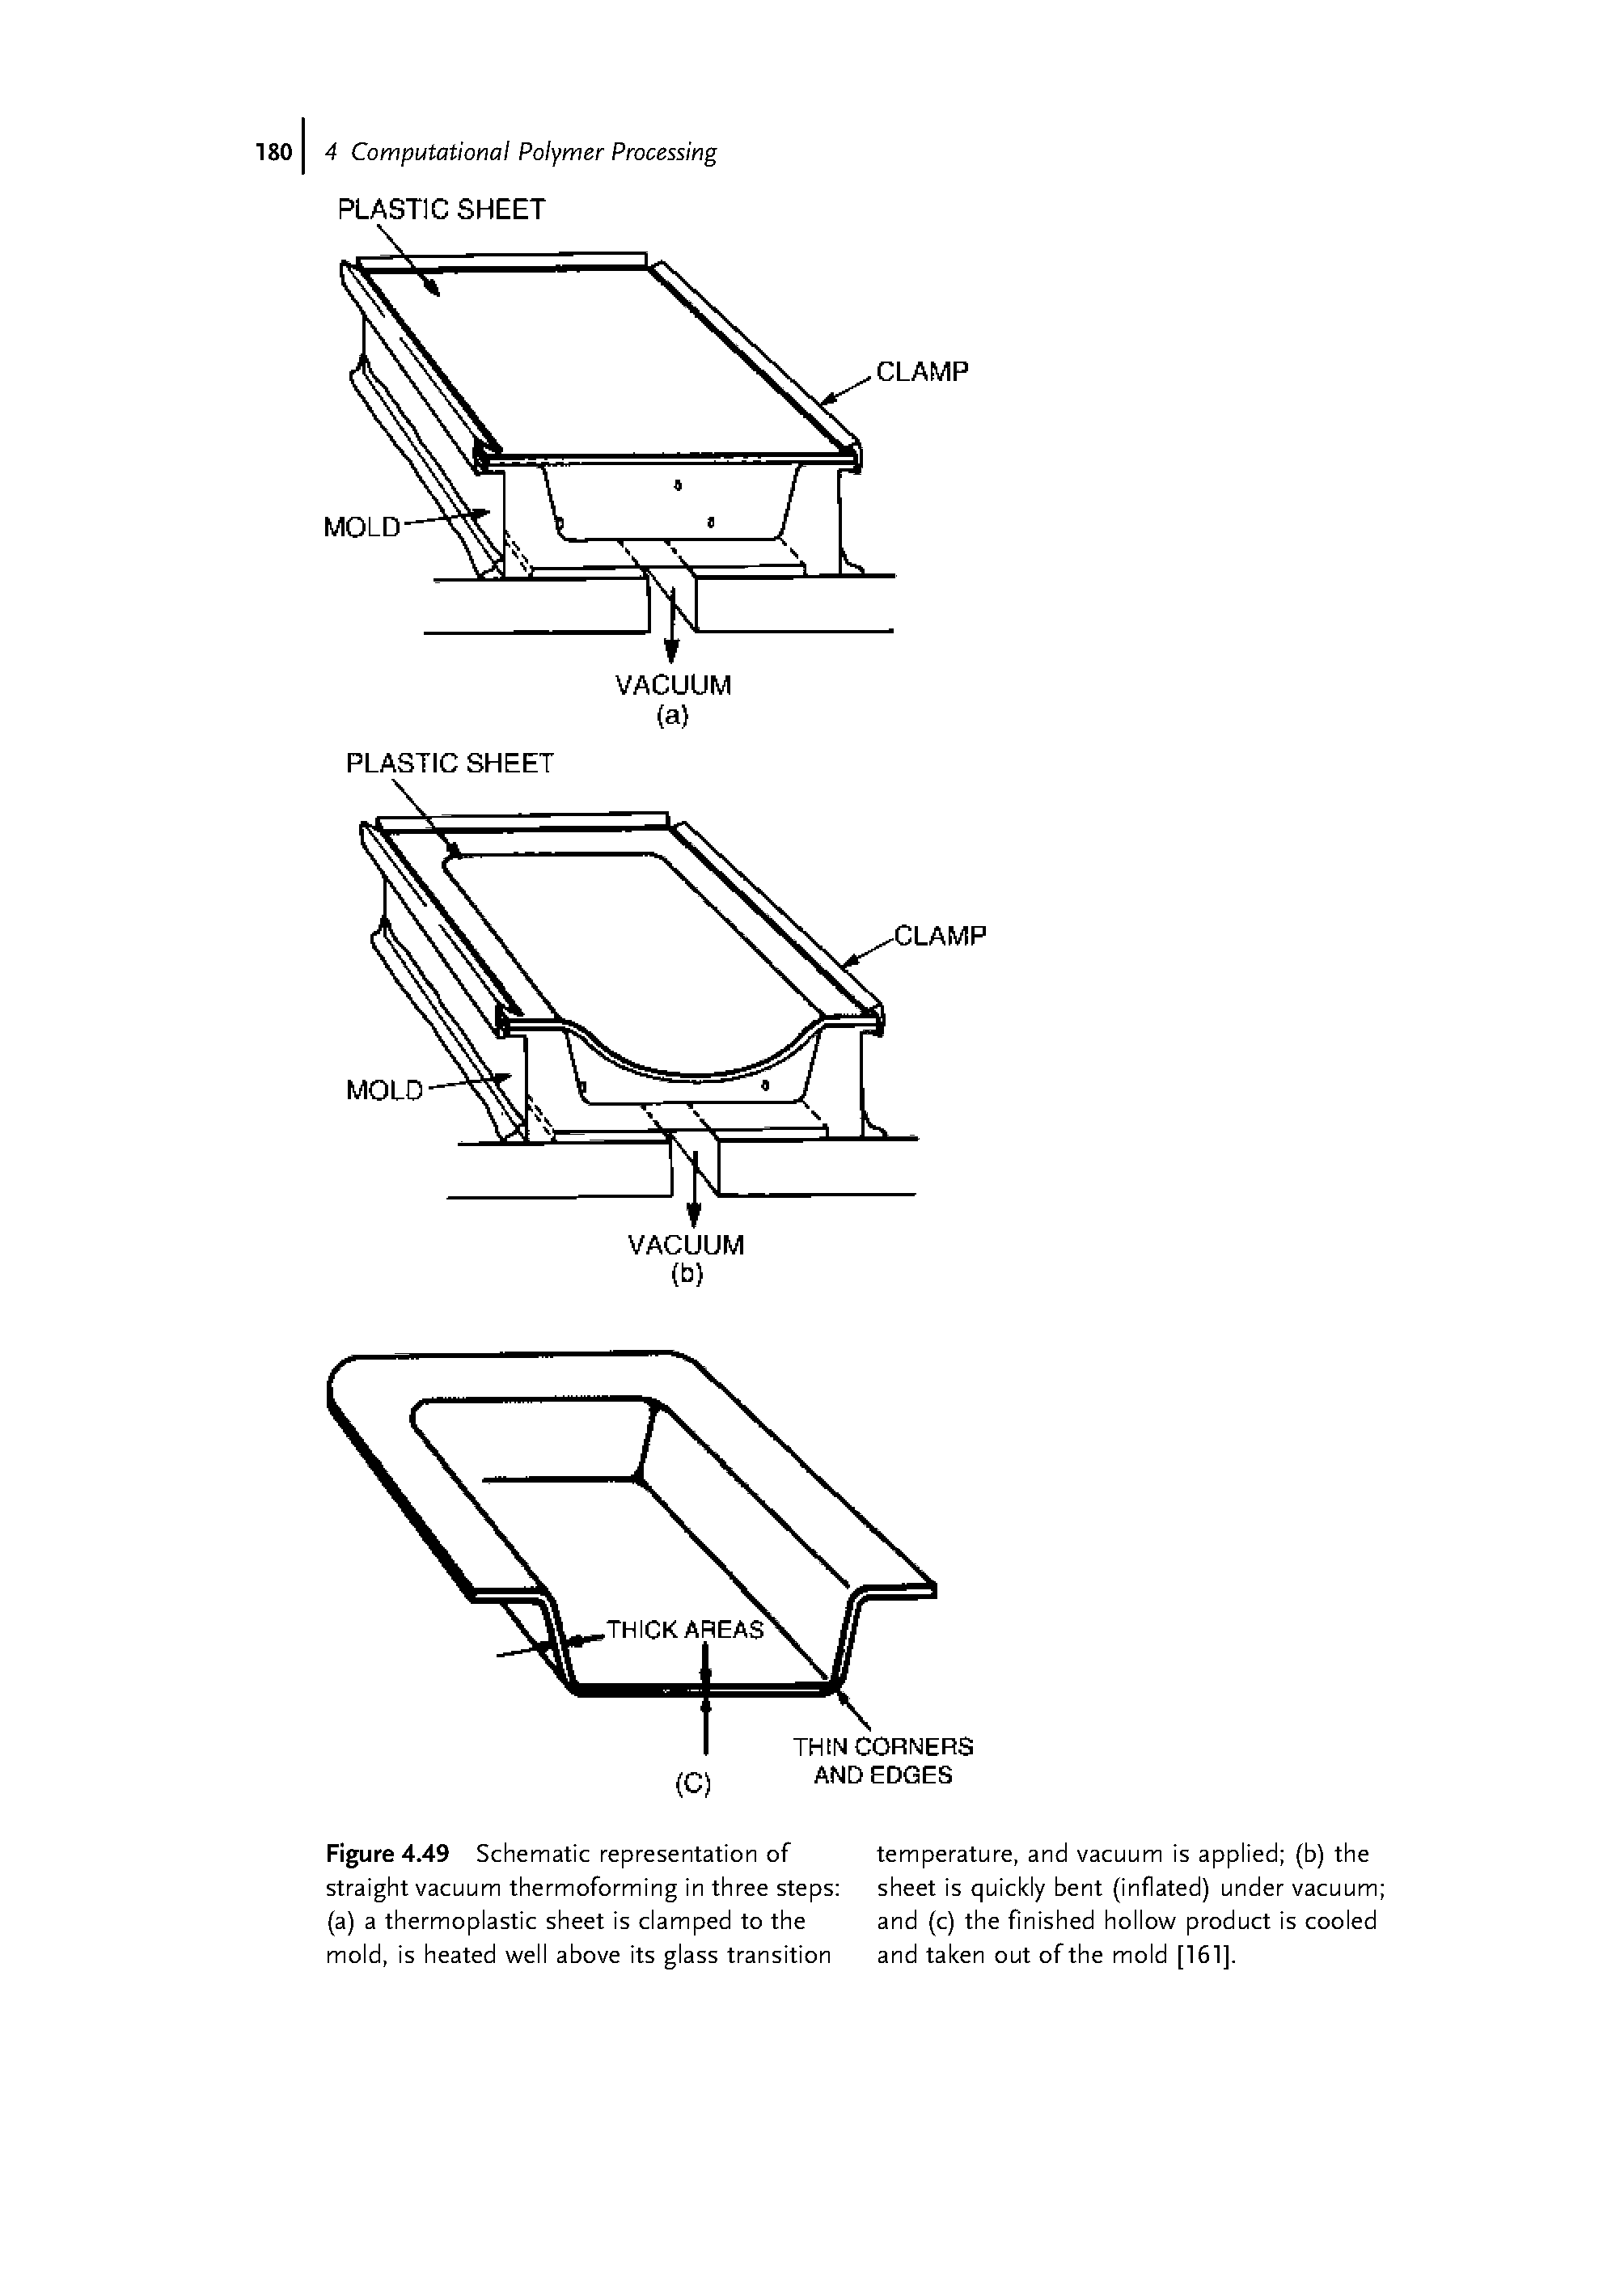 Figure 4.49 Schematic representation of straight vacuum thermoforming in three steps (a) a thermoplastic sheet is clamped to the mold, is heated well above its glass transition...